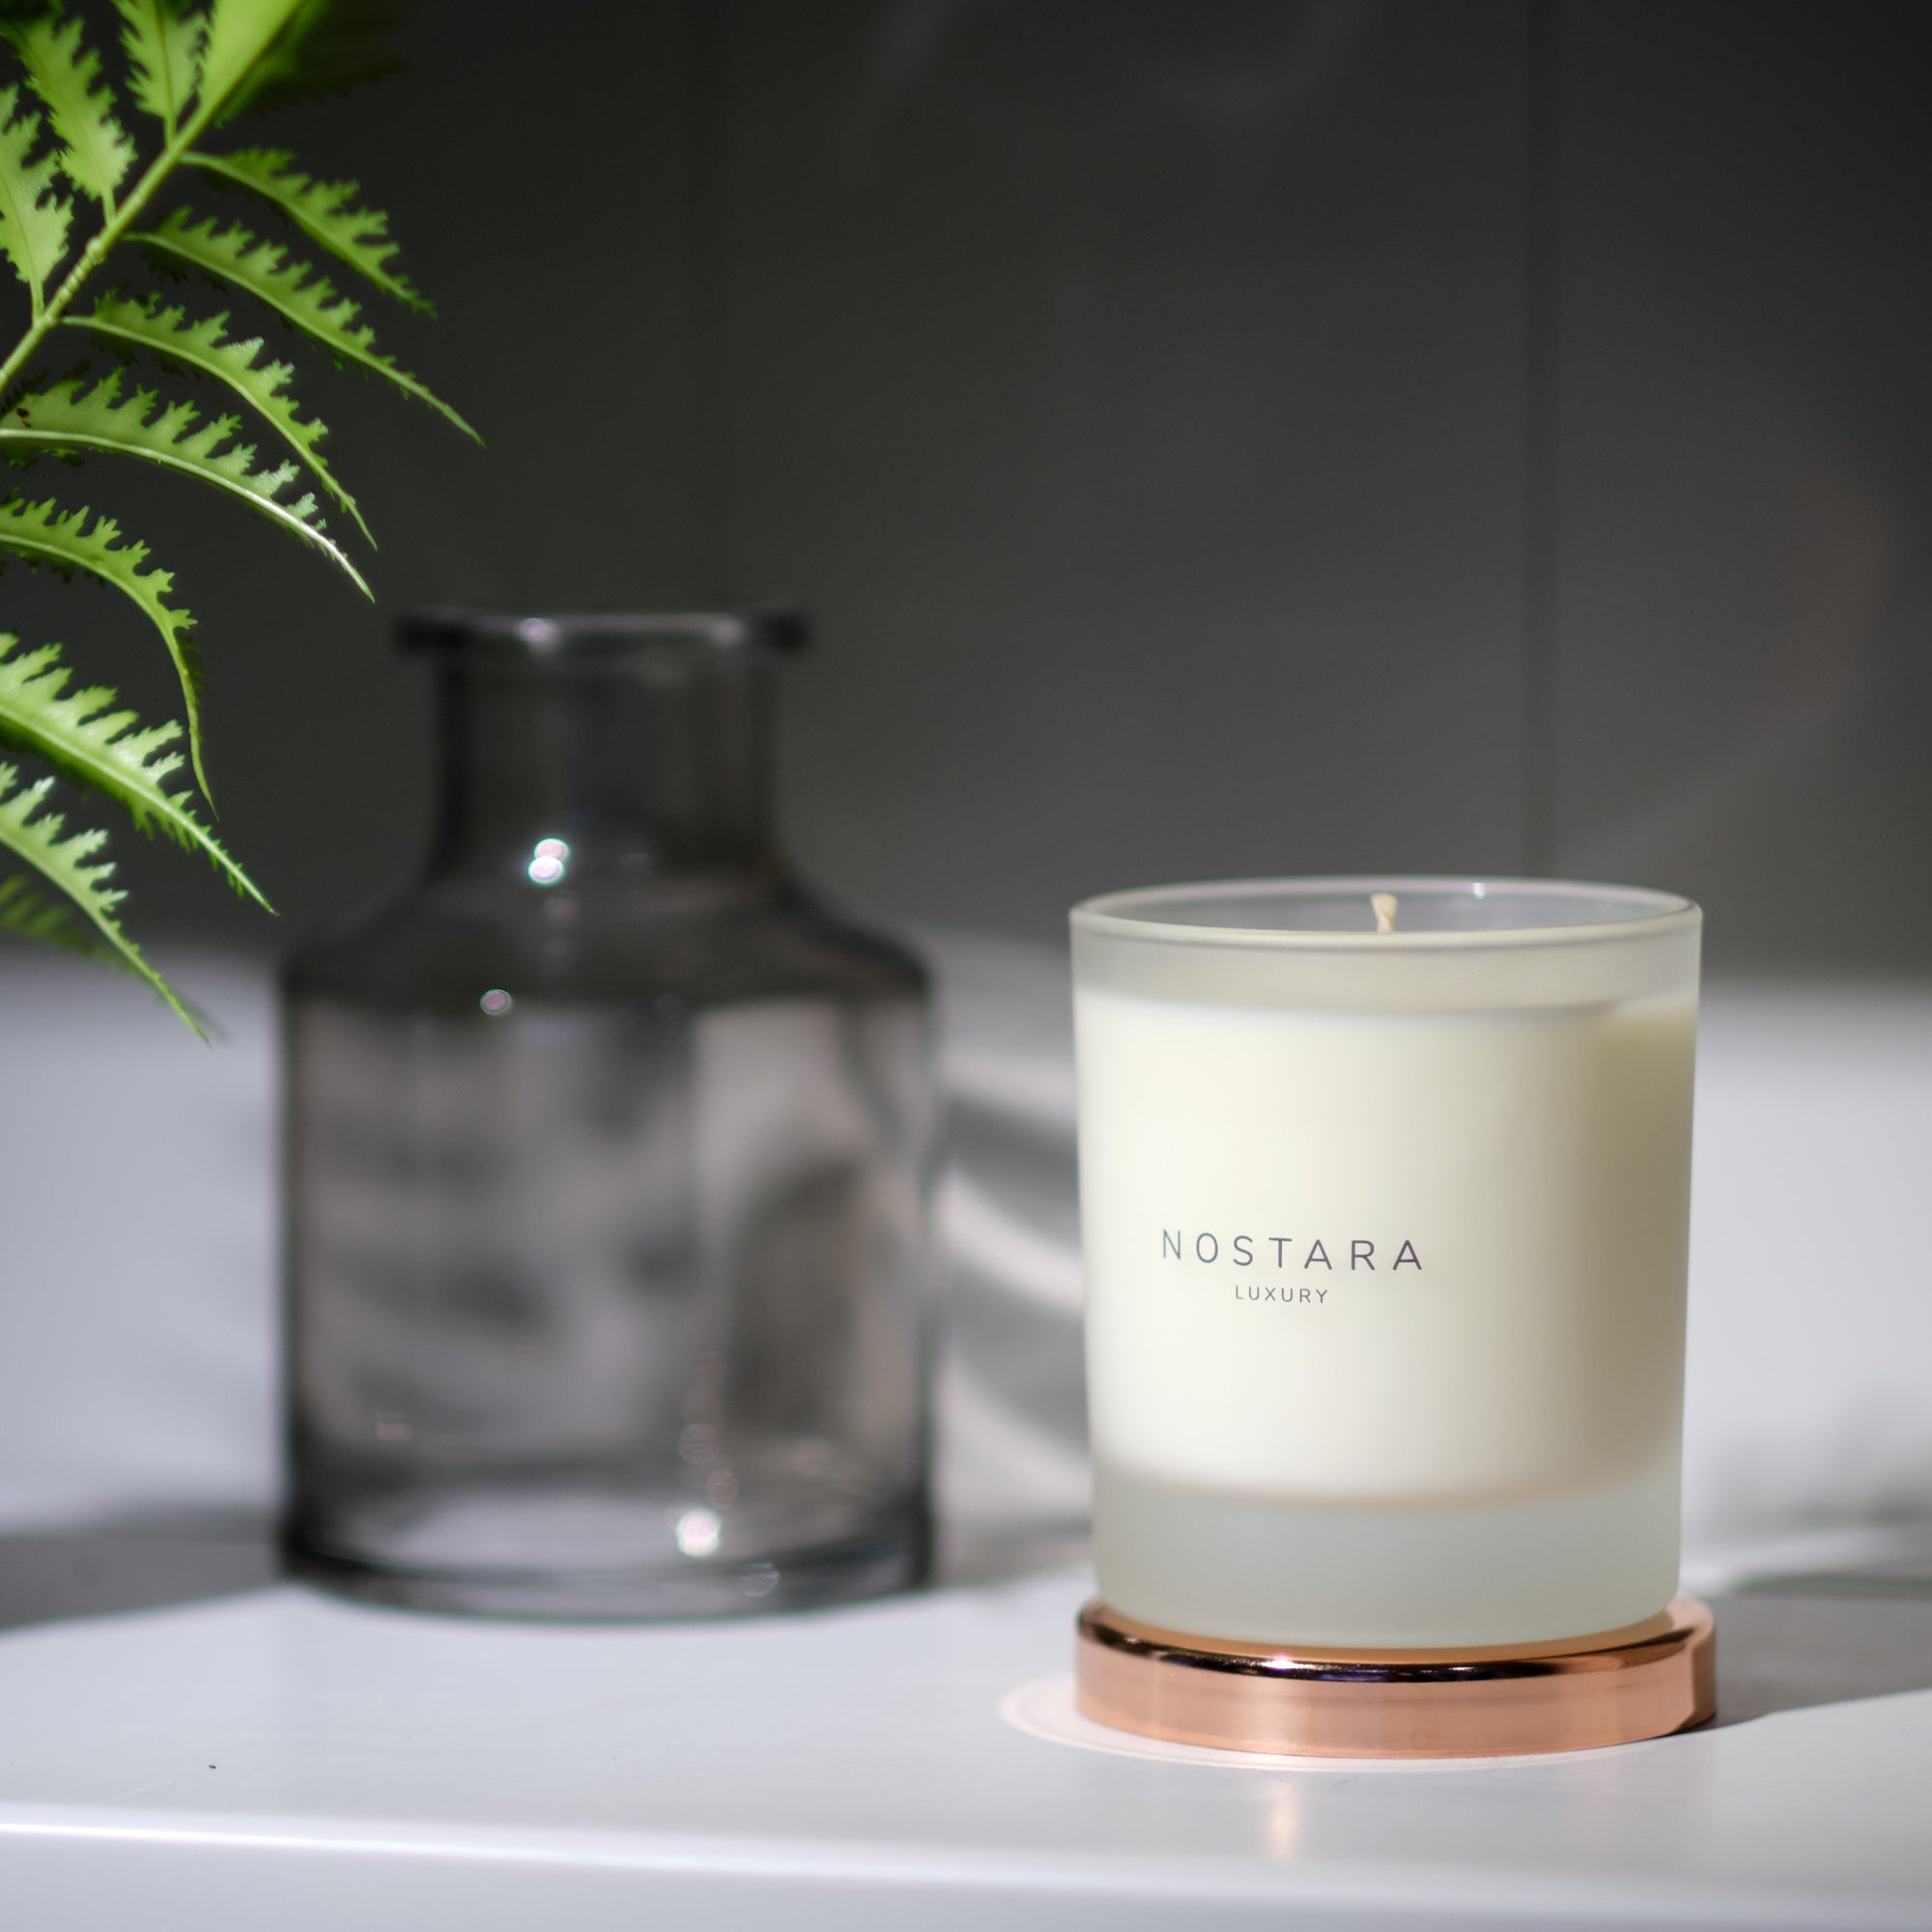 Nostara scented candle on shelf with green fern